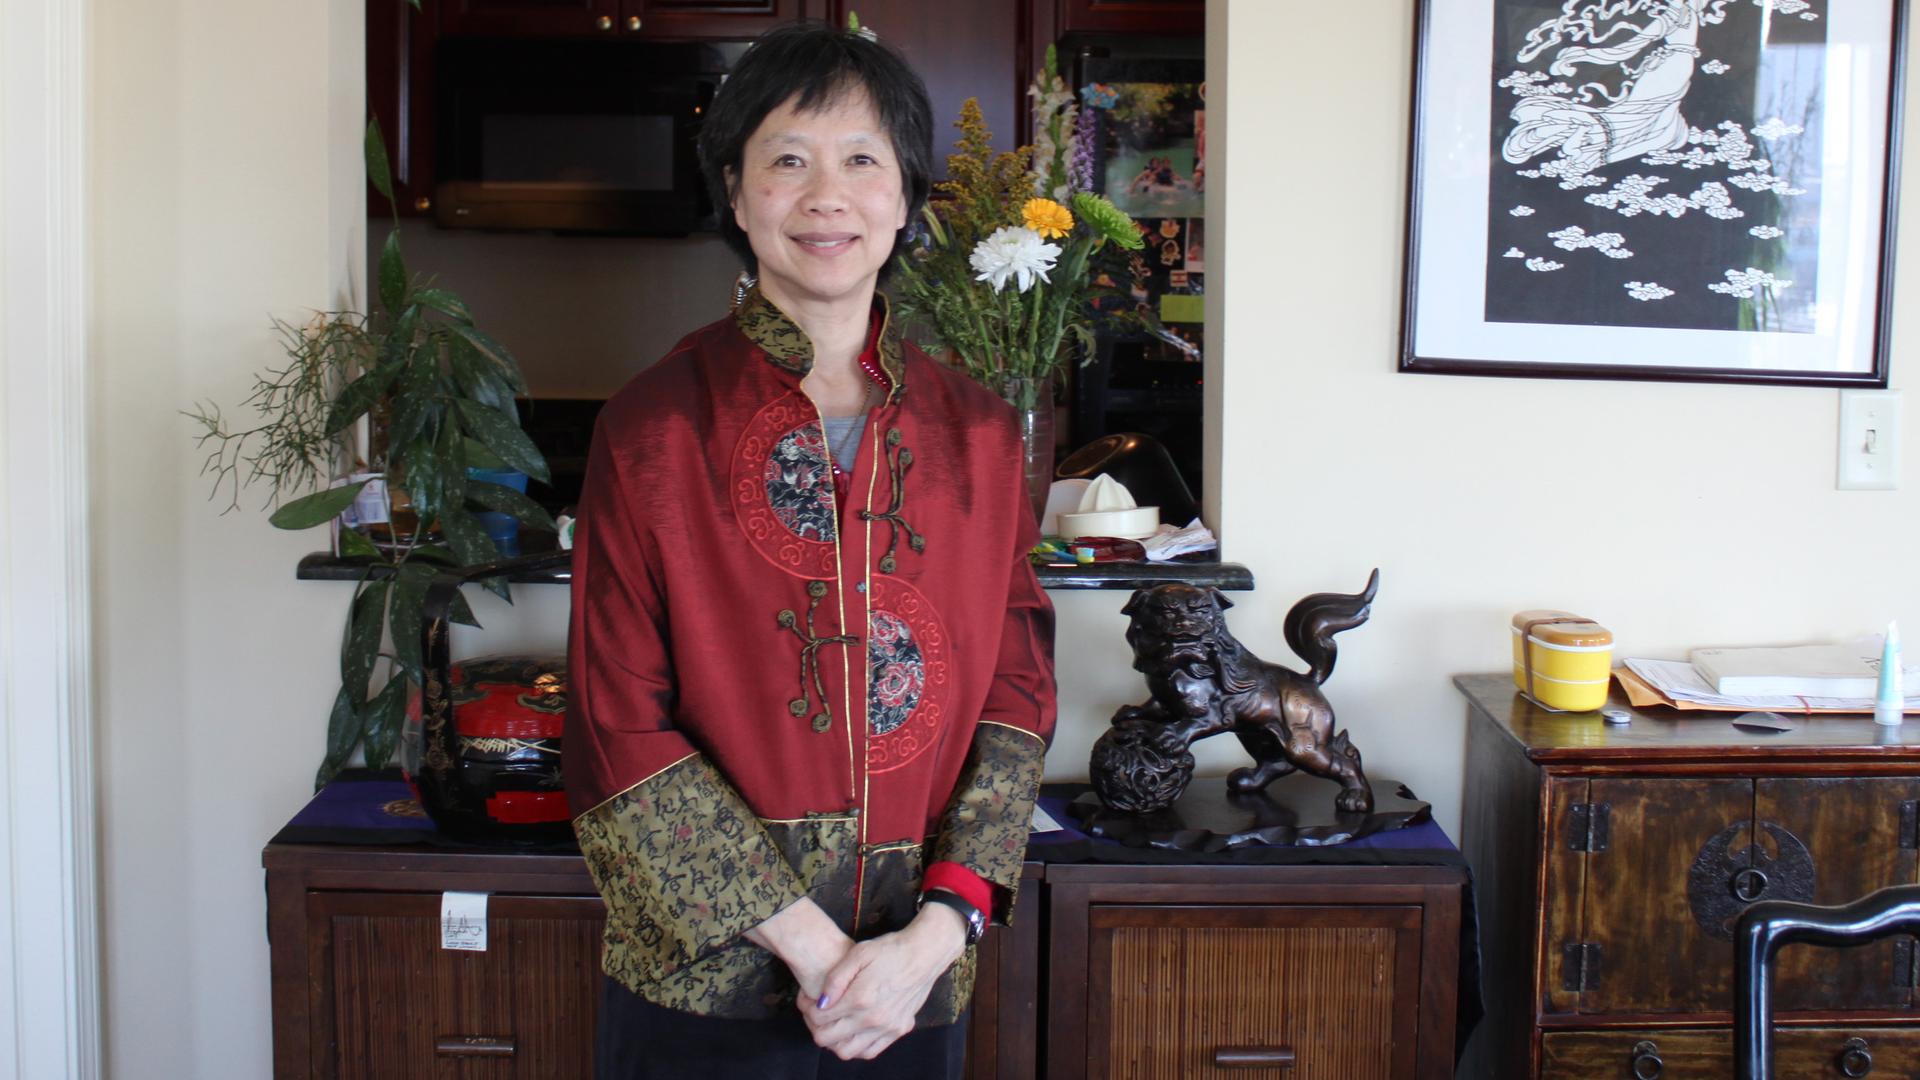 Cheng Imm Tan at home in Boston.